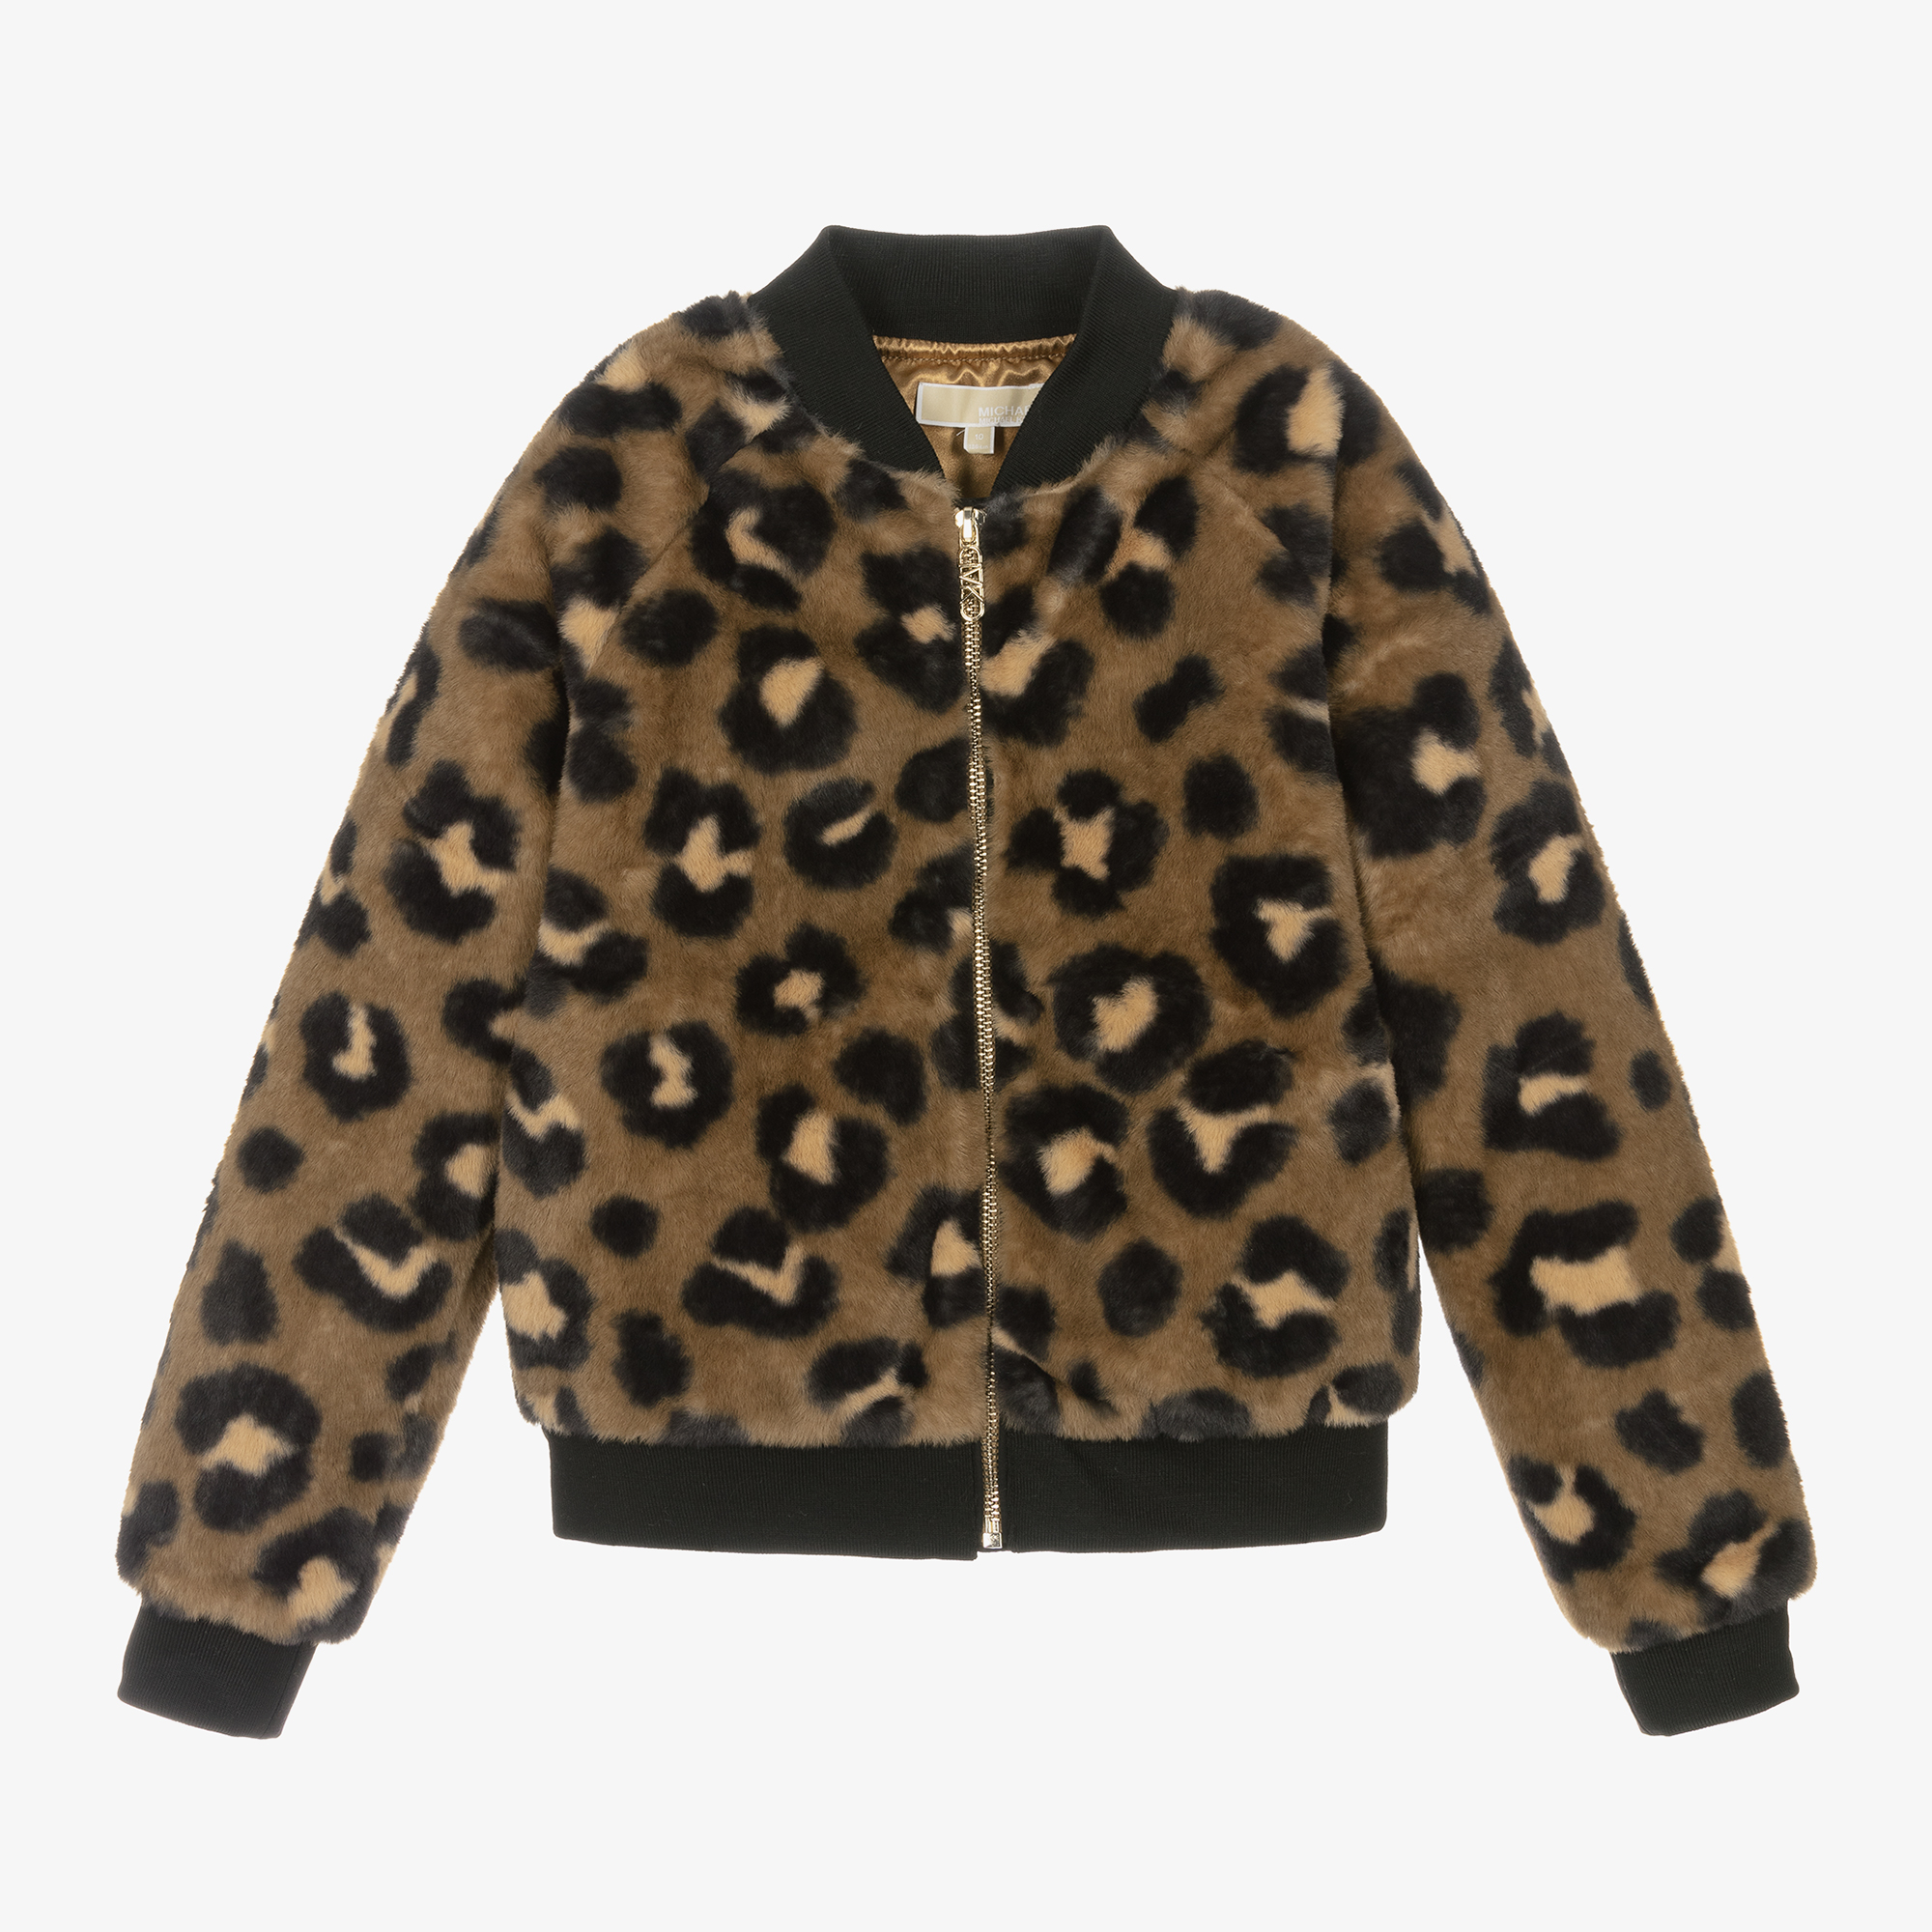 MICHAEL BY MICHAEL KORS  DOWN JACKET WITH ANIMAL PRINT AND LOGO PATCH   Eleonora Bonucci